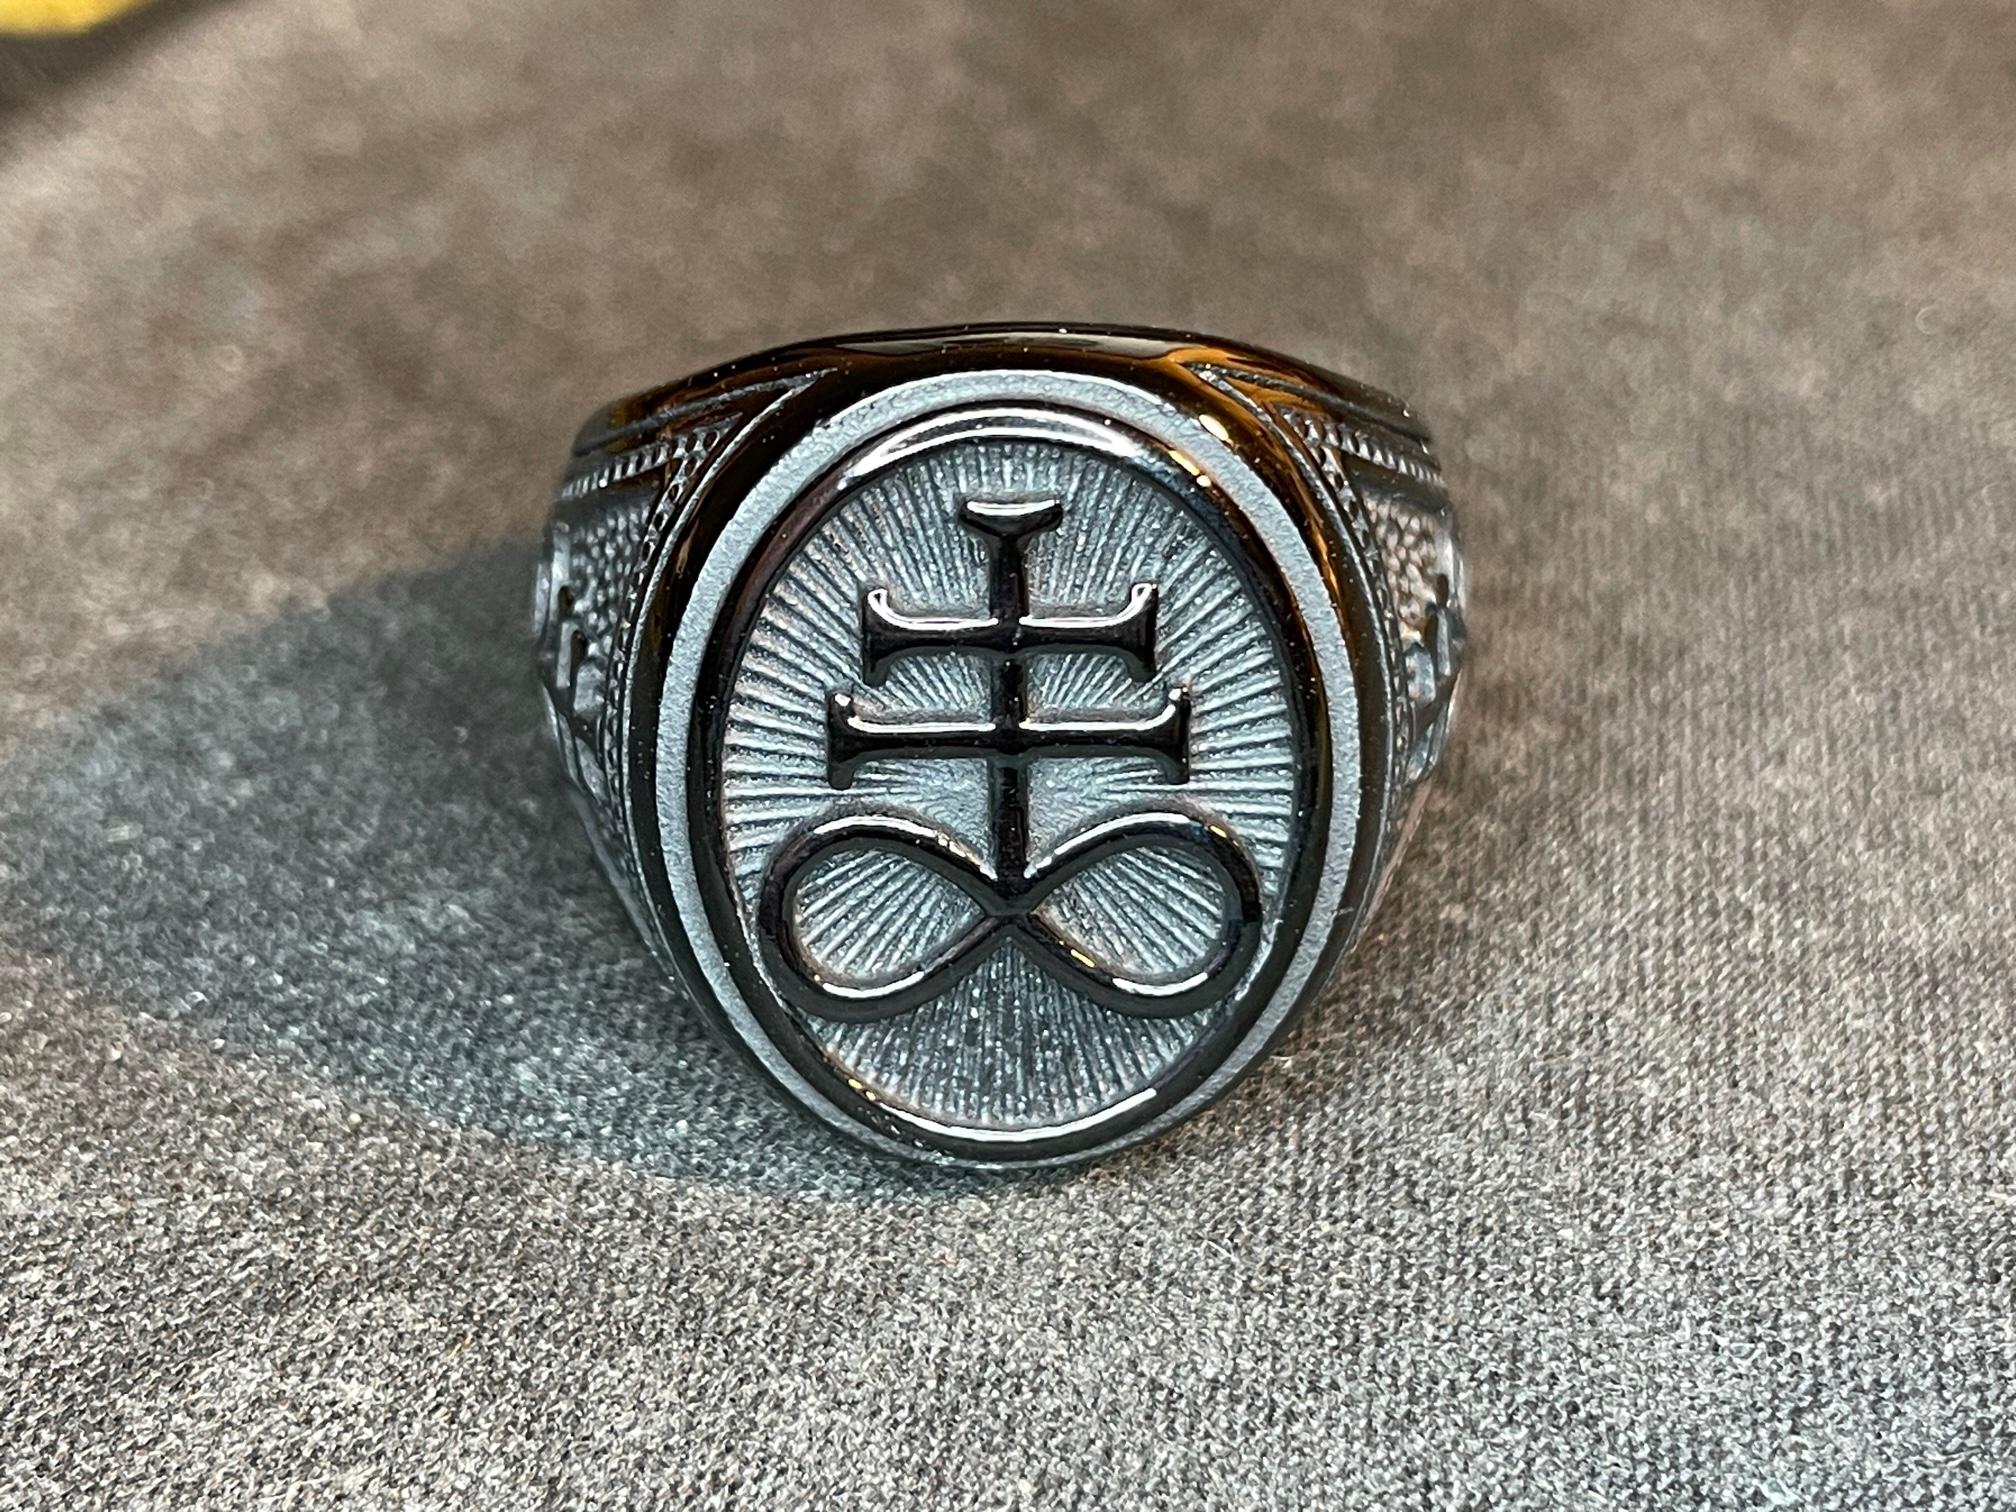 Sigil of Leviathan Seal of Satan Baphomet Signet Statement Ring Gothic Vintage Punk Pagan Wiccan Druid Satanic Occult Darkness Jewelry Black